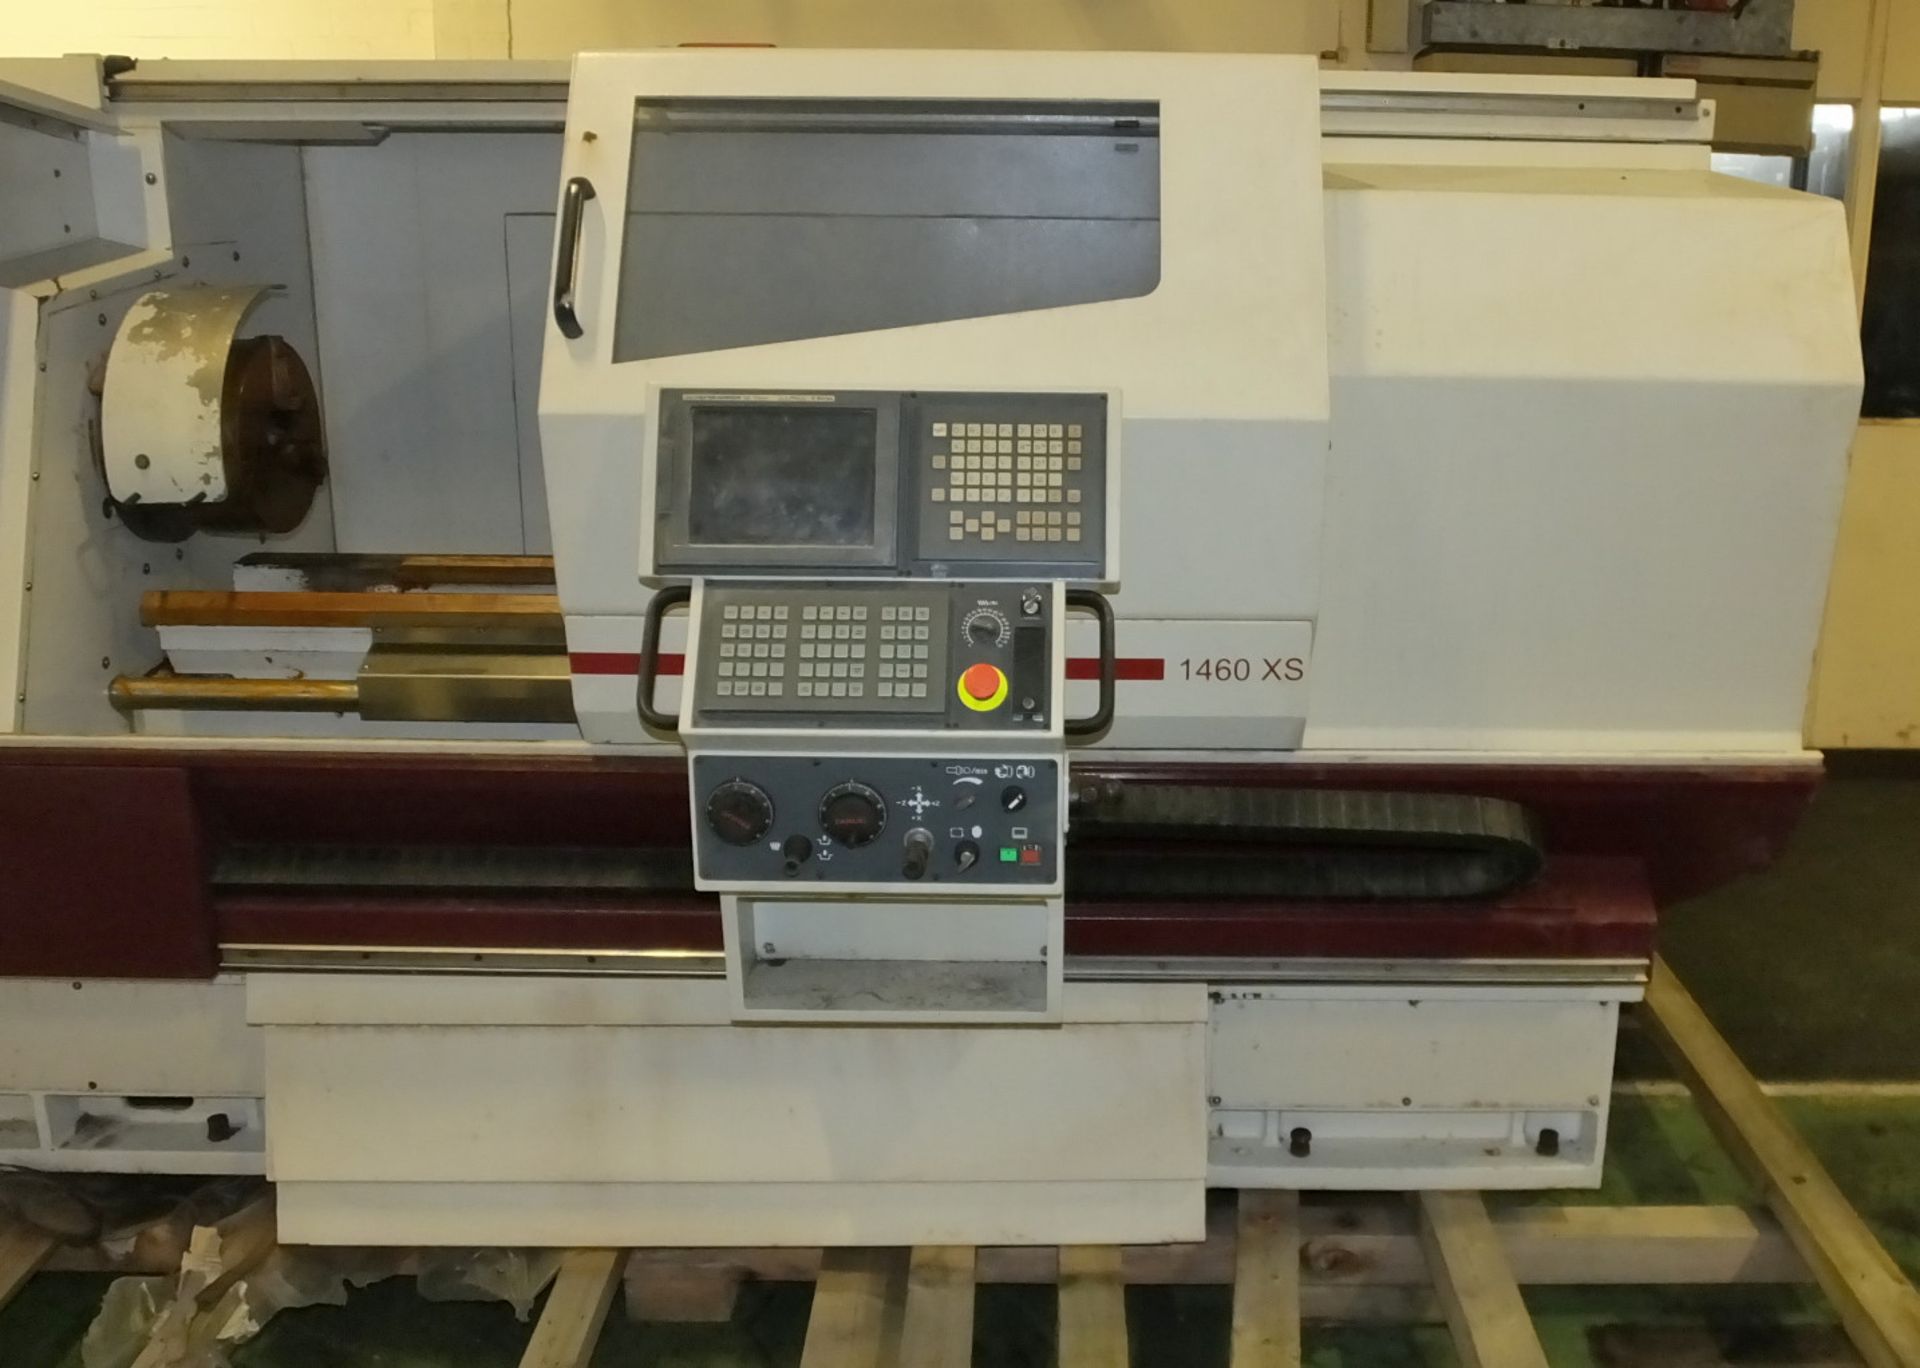 Harrison Alpha 1460XS lathe - Serial X3S046 - 600 lathe no X3S046 / 080J - Year of build 2 - Image 3 of 30